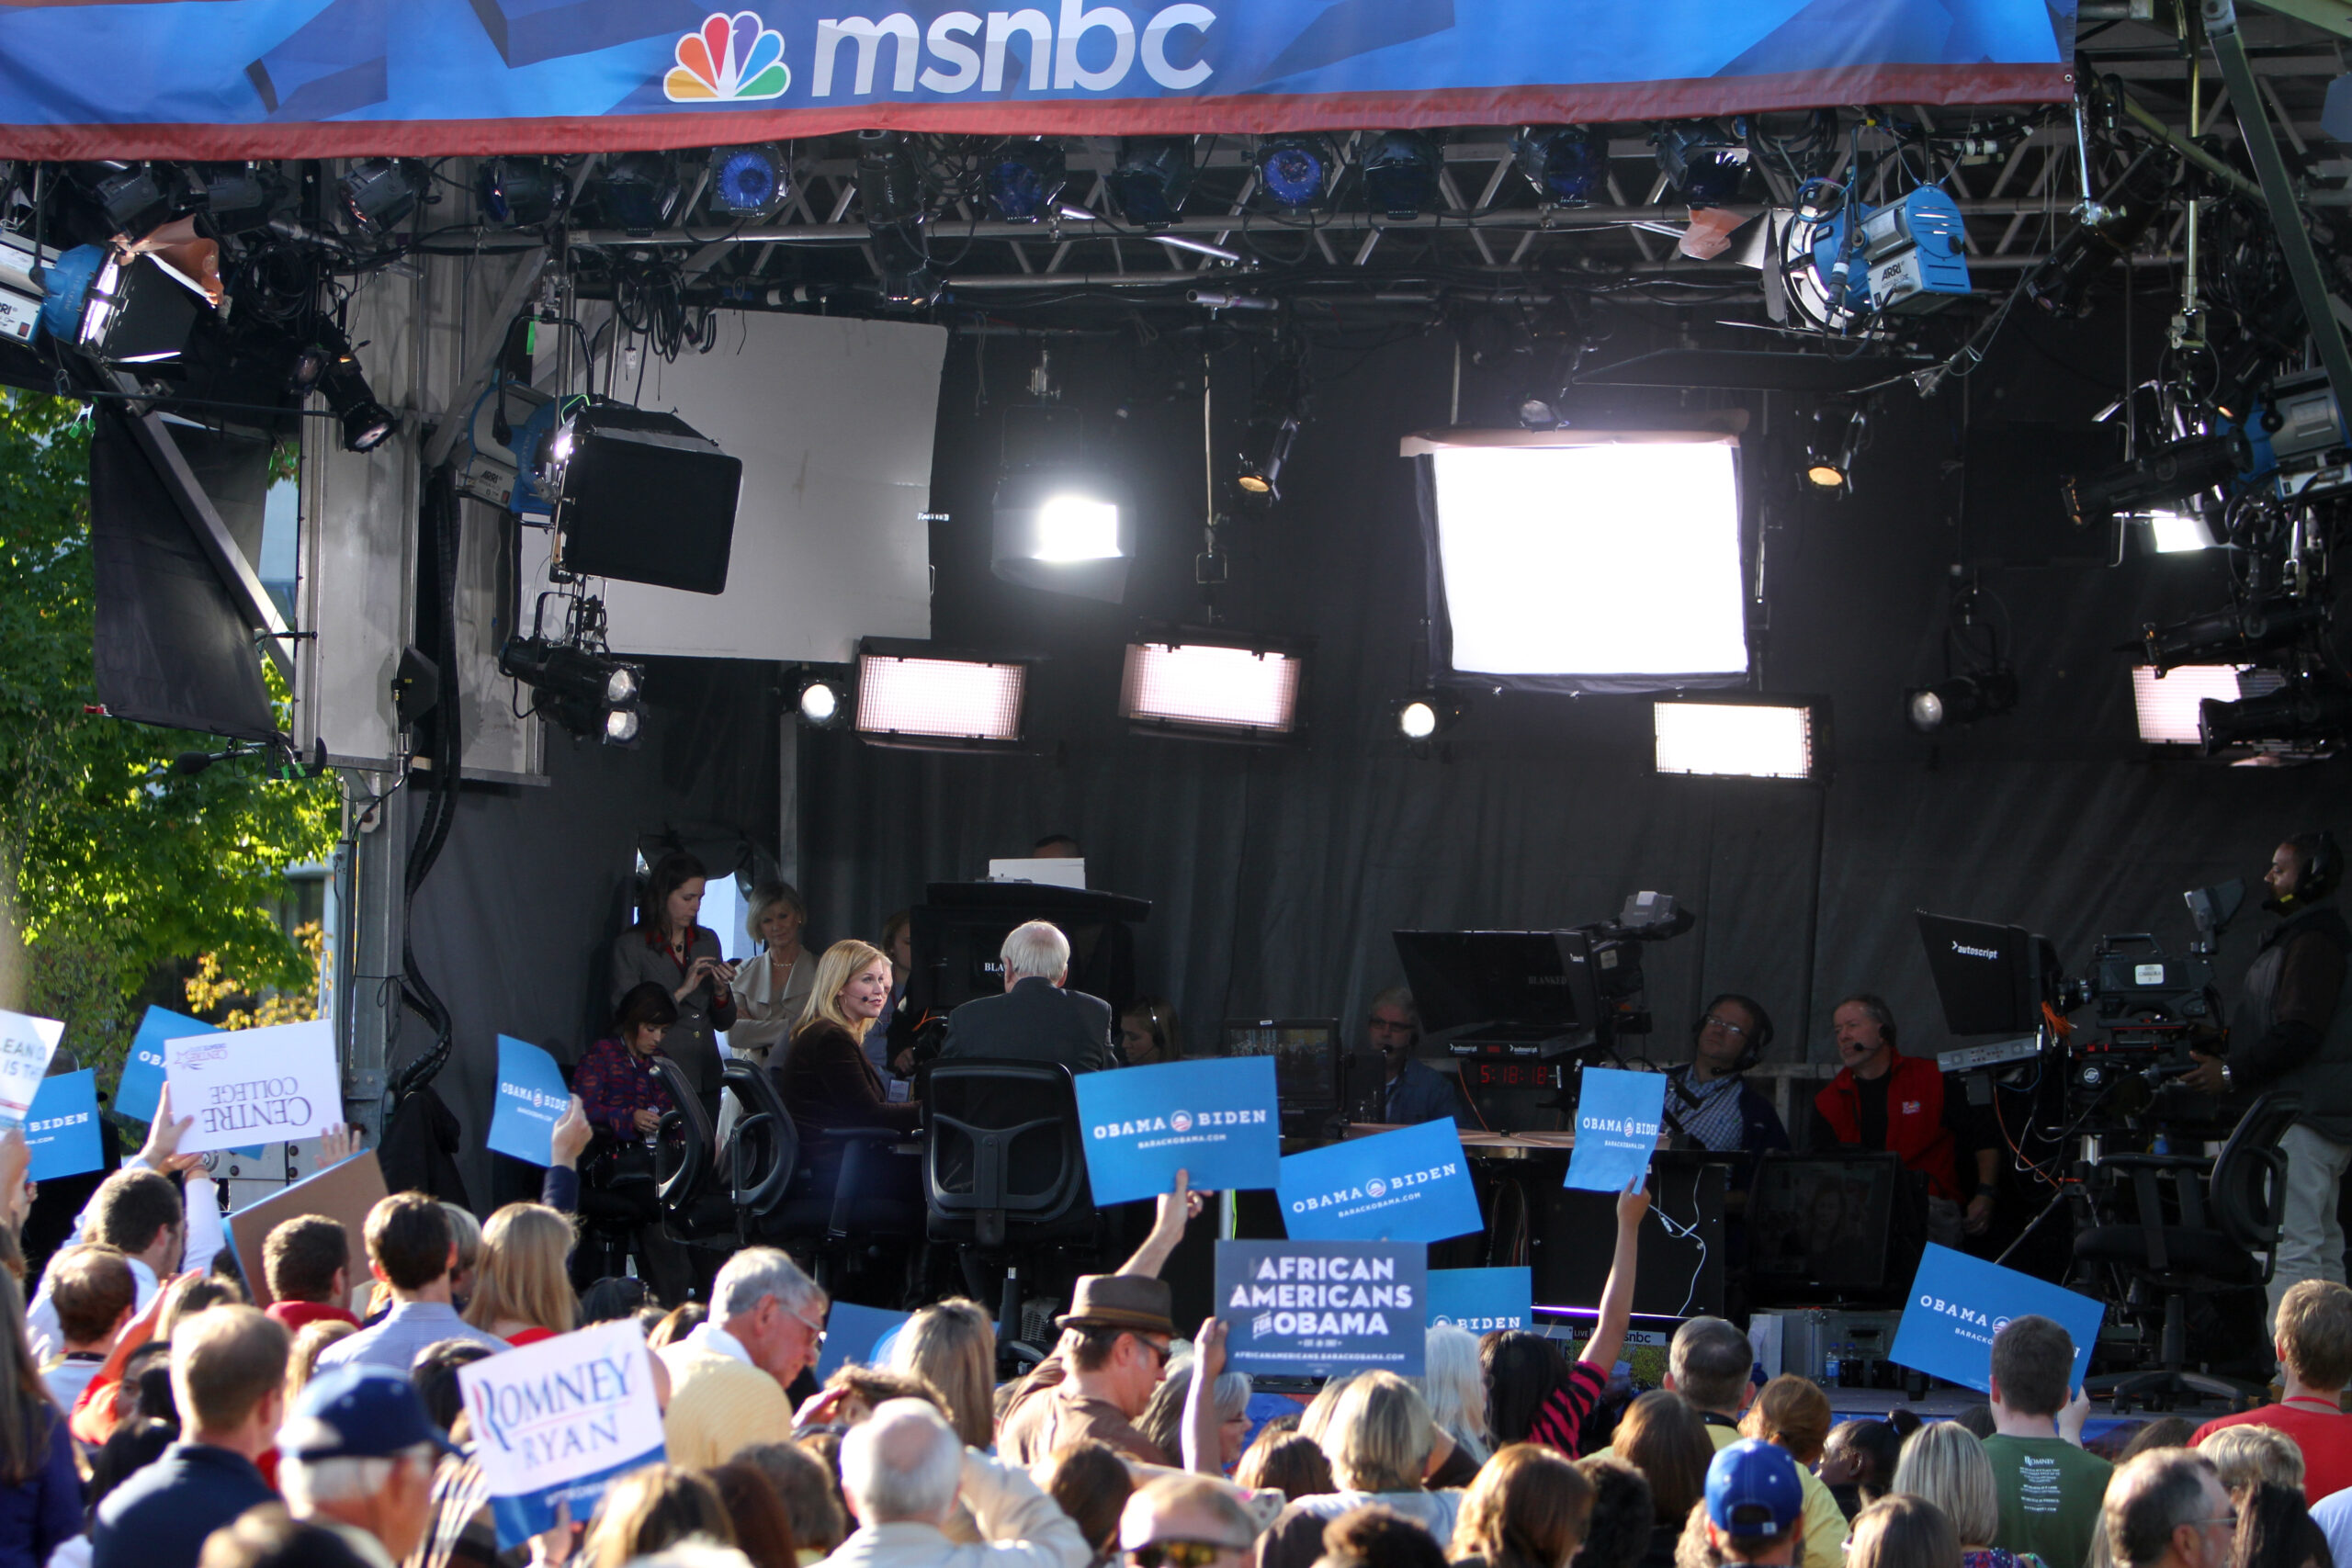 People holding political signs while MSNBC records in their booth behind them